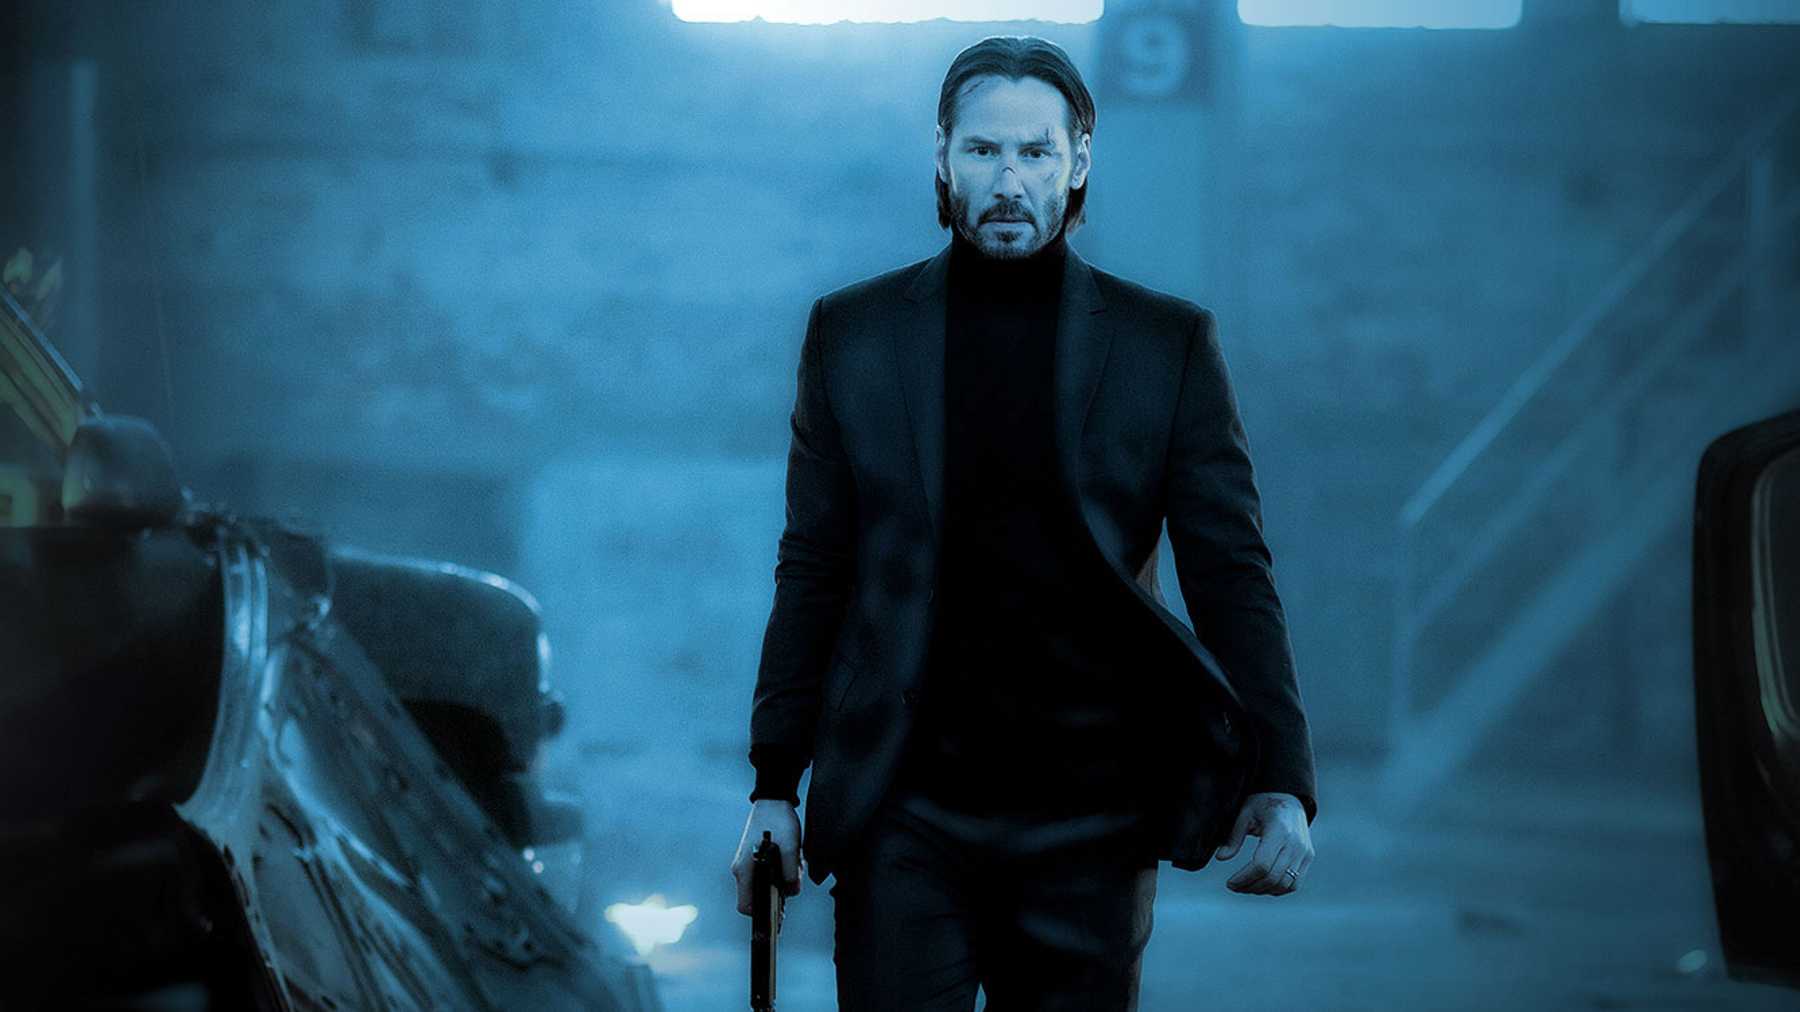 John Wick 4' and 'John Wick 5' Are Coming Soon and Filming Back-To